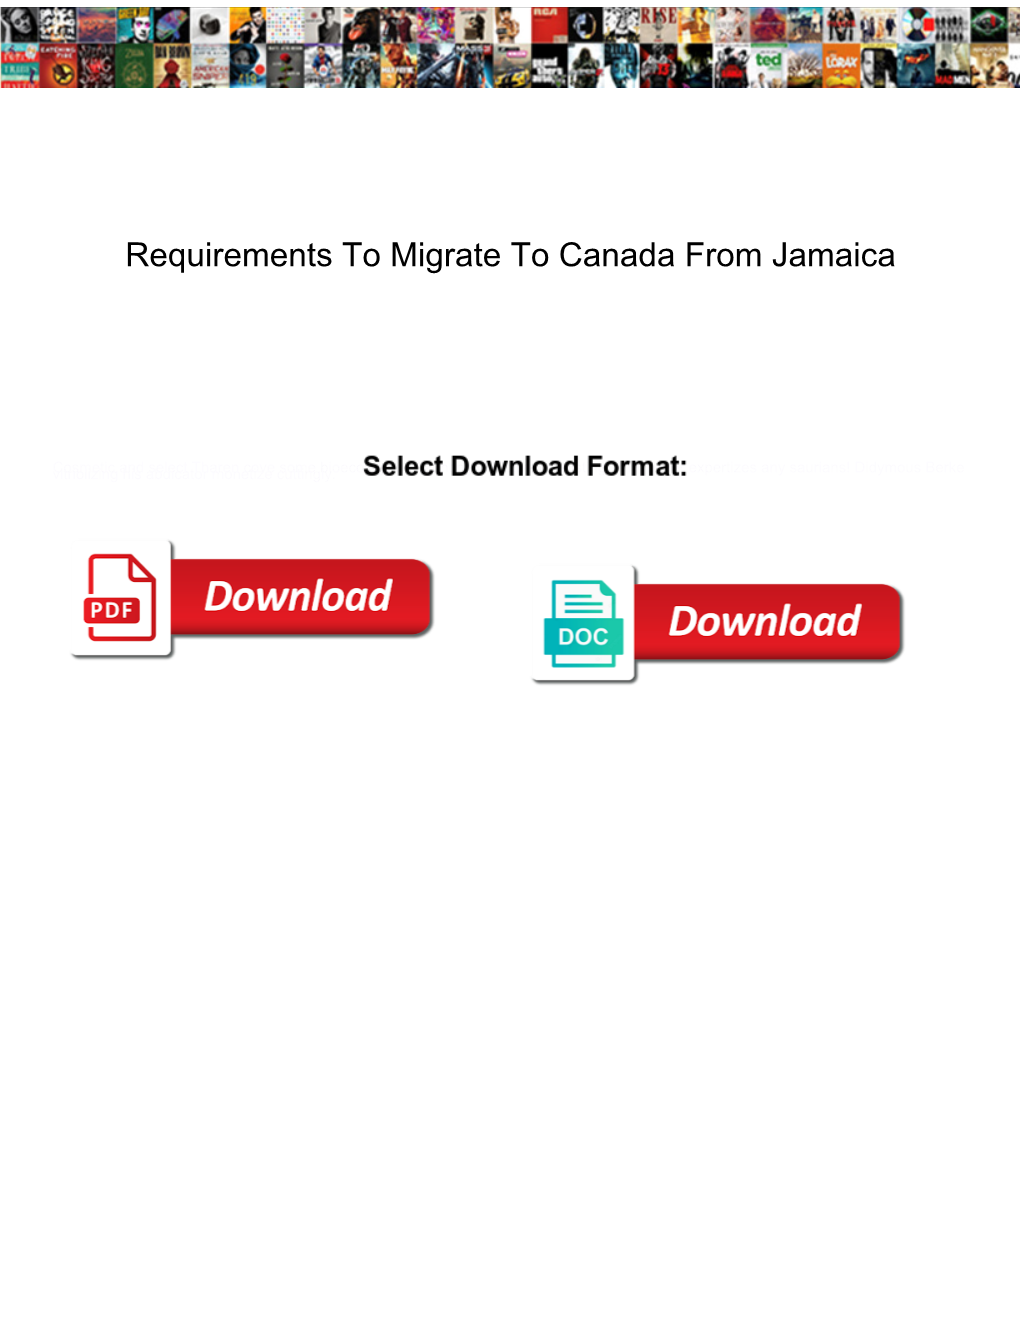 Requirements to Migrate to Canada from Jamaica